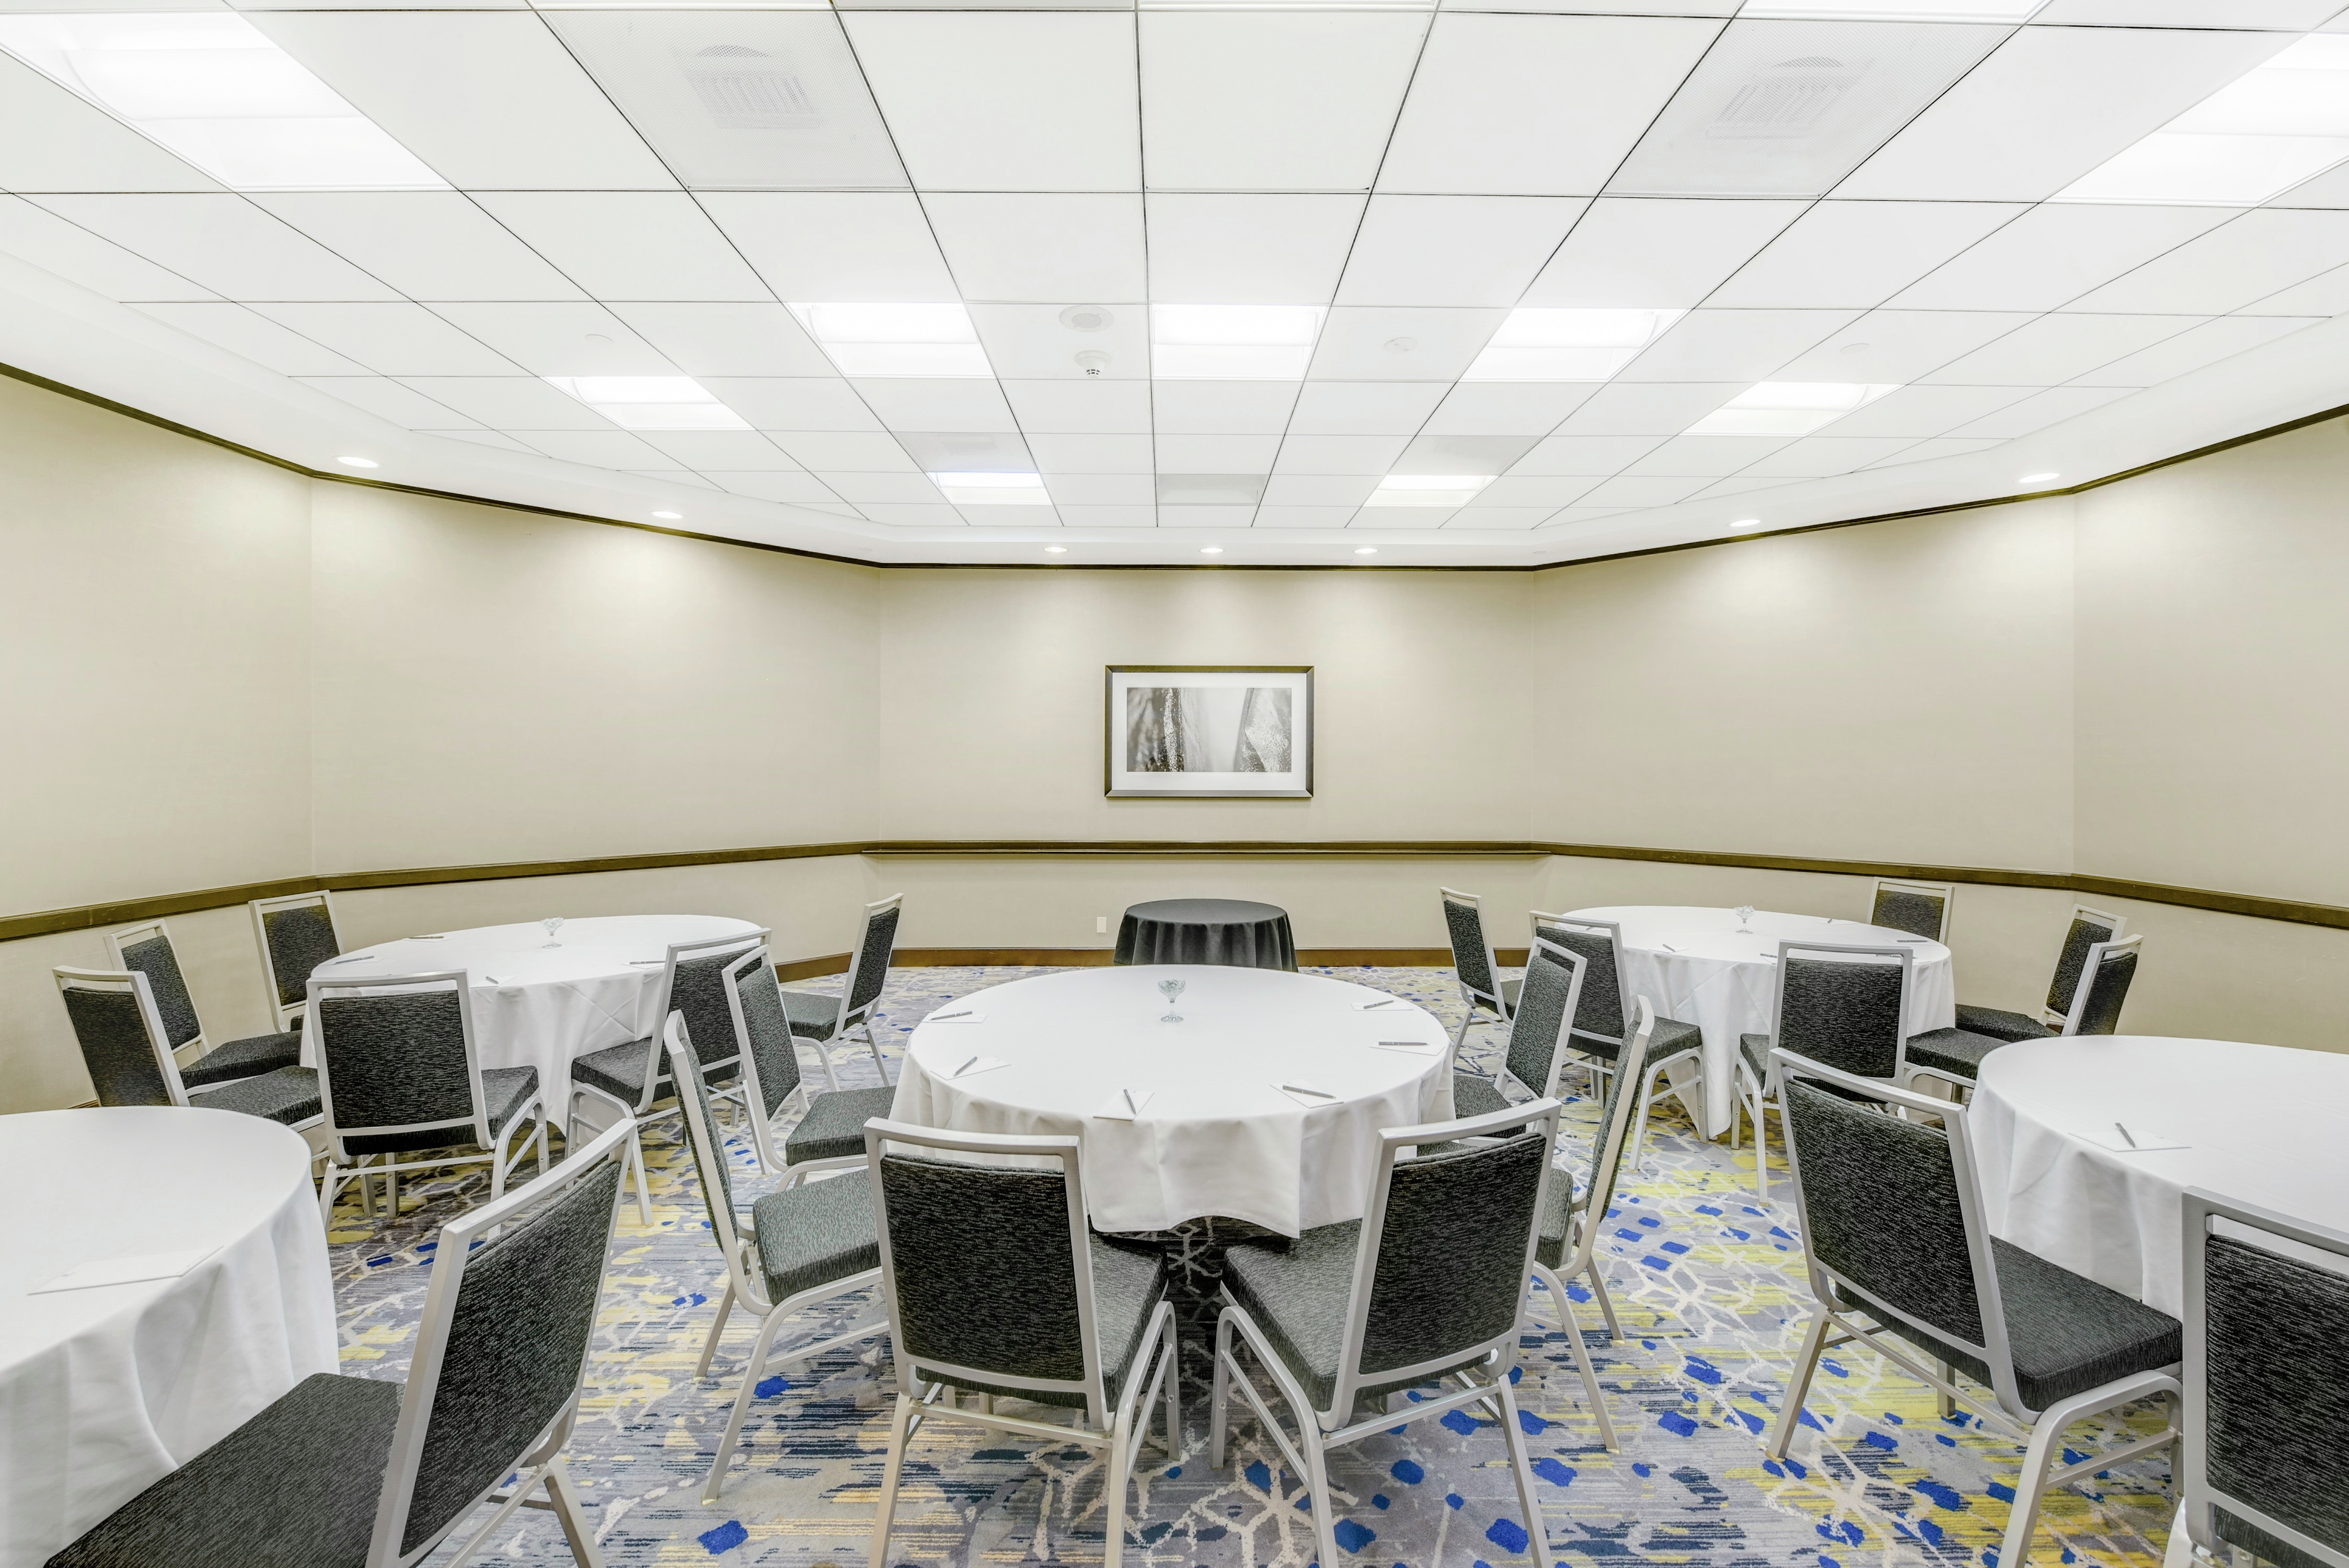 Meeting Room with Round Tables and Chairs